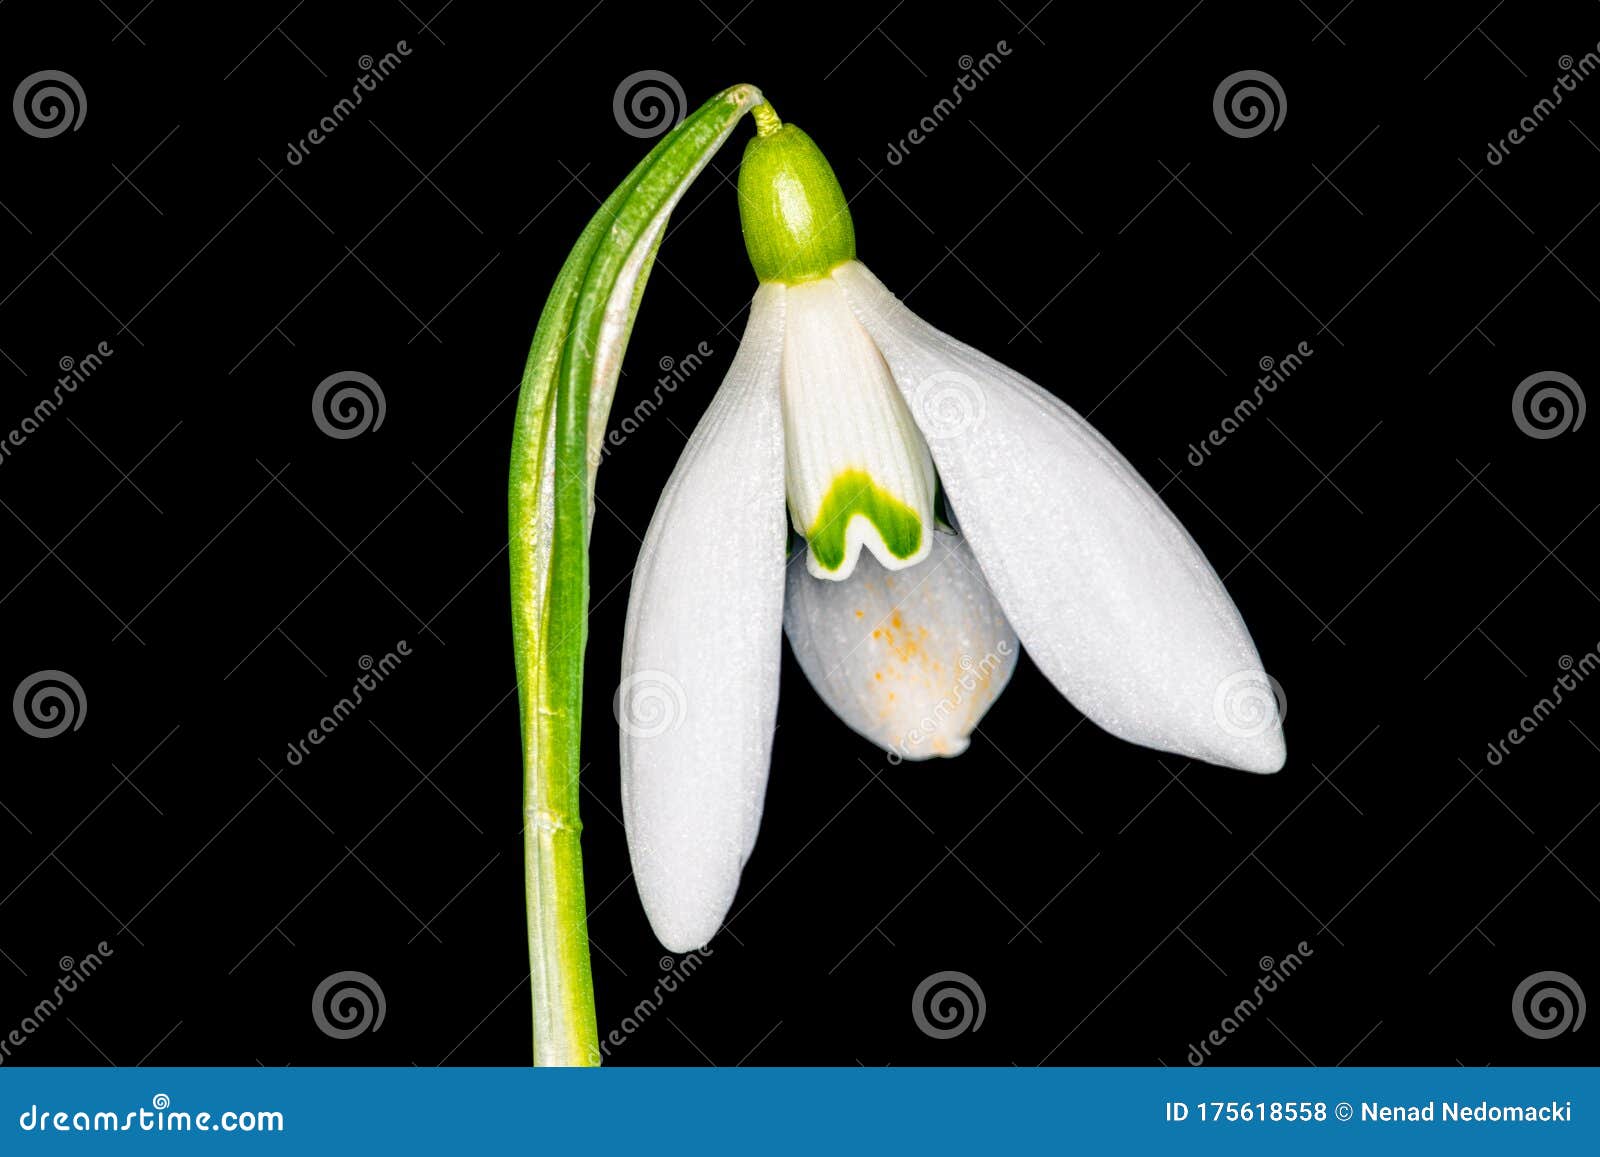 Snowdrop Galanthus Flower Bulb With White Petals On Black Background Stock Photo Image Of Close Botany 175618558